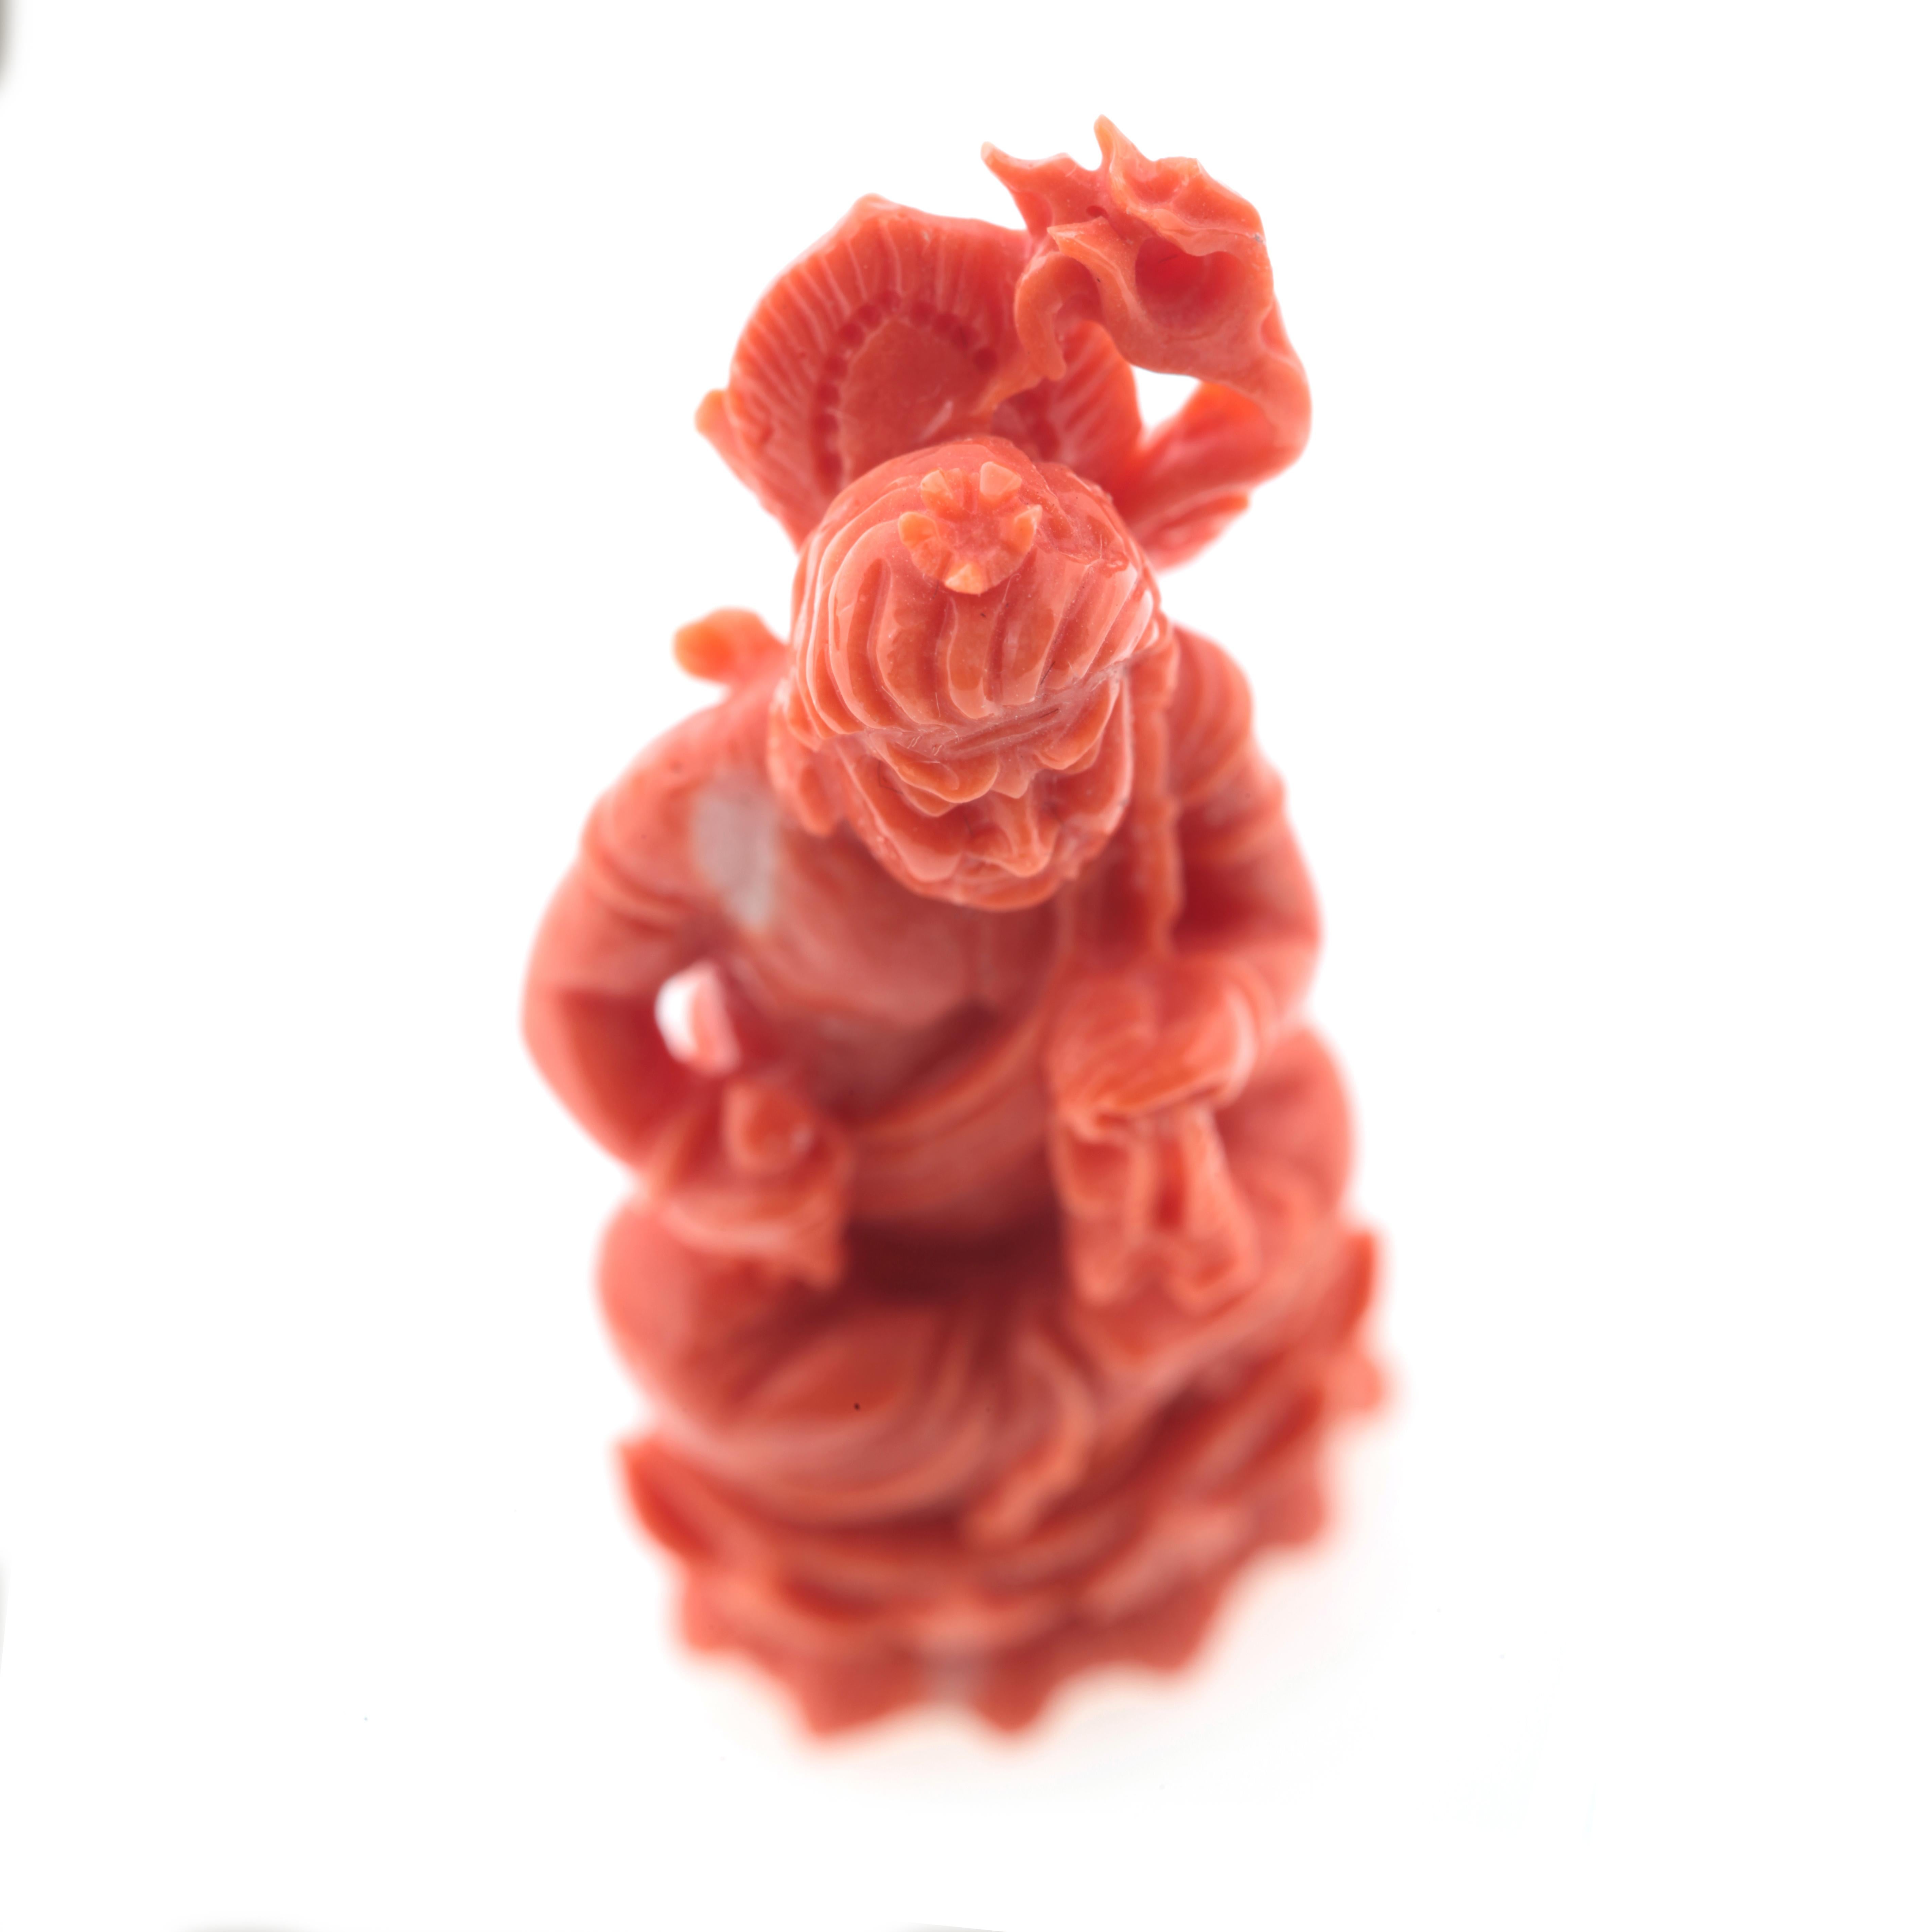 20th Century Wise Man Buddhist Carved Asian Decorative Art Statue Sculpture Natural Red Coral For Sale